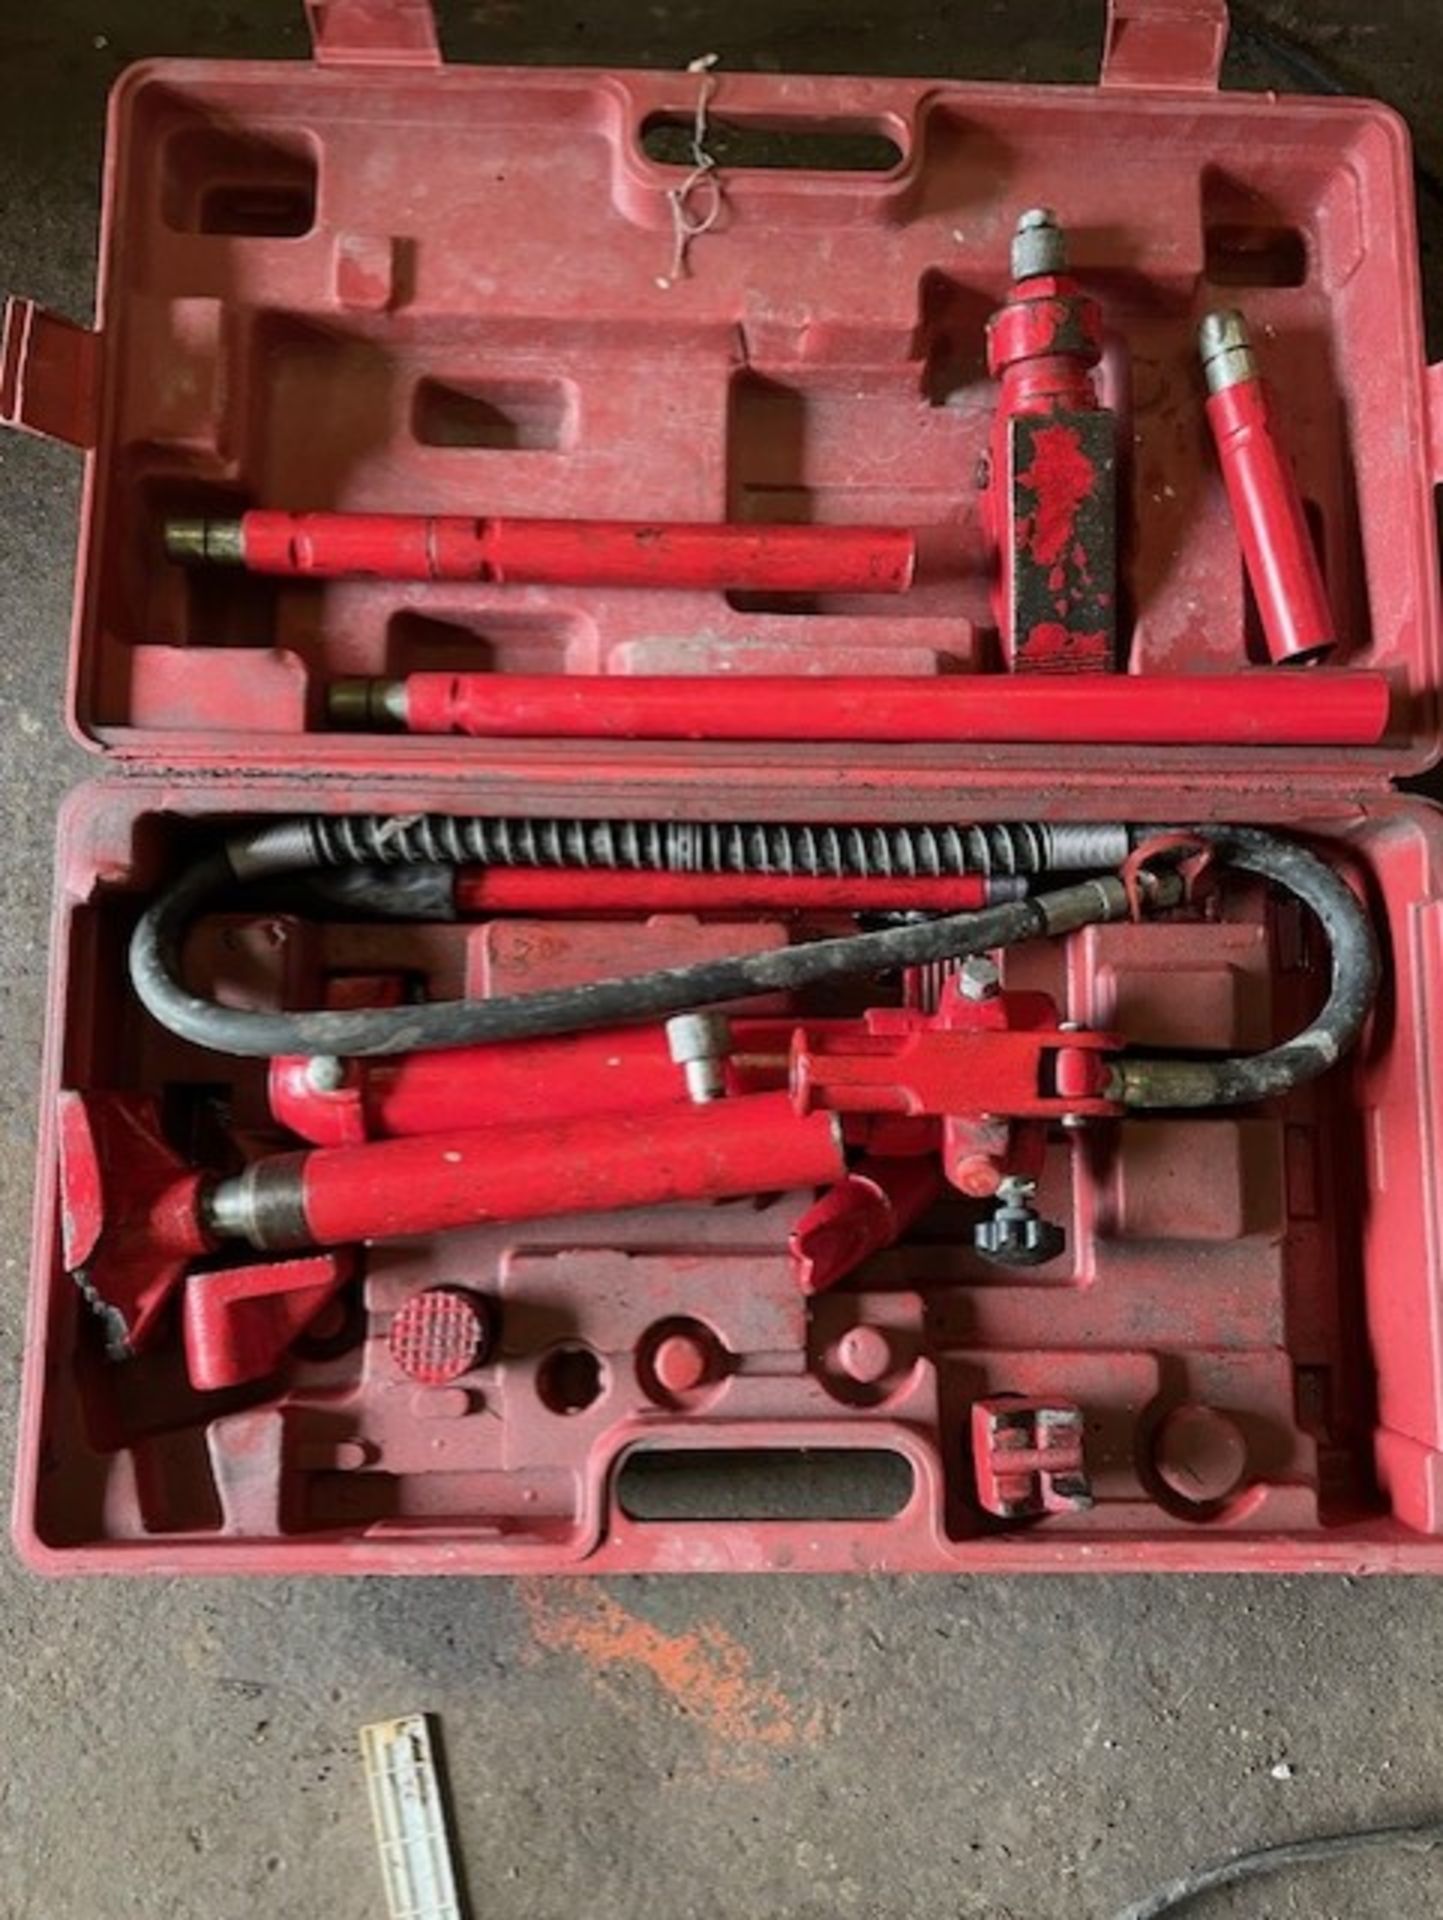 Panel beating tools for pulling out dinted metal crushed metal into shape all in the box , Air - Bild 2 aus 7